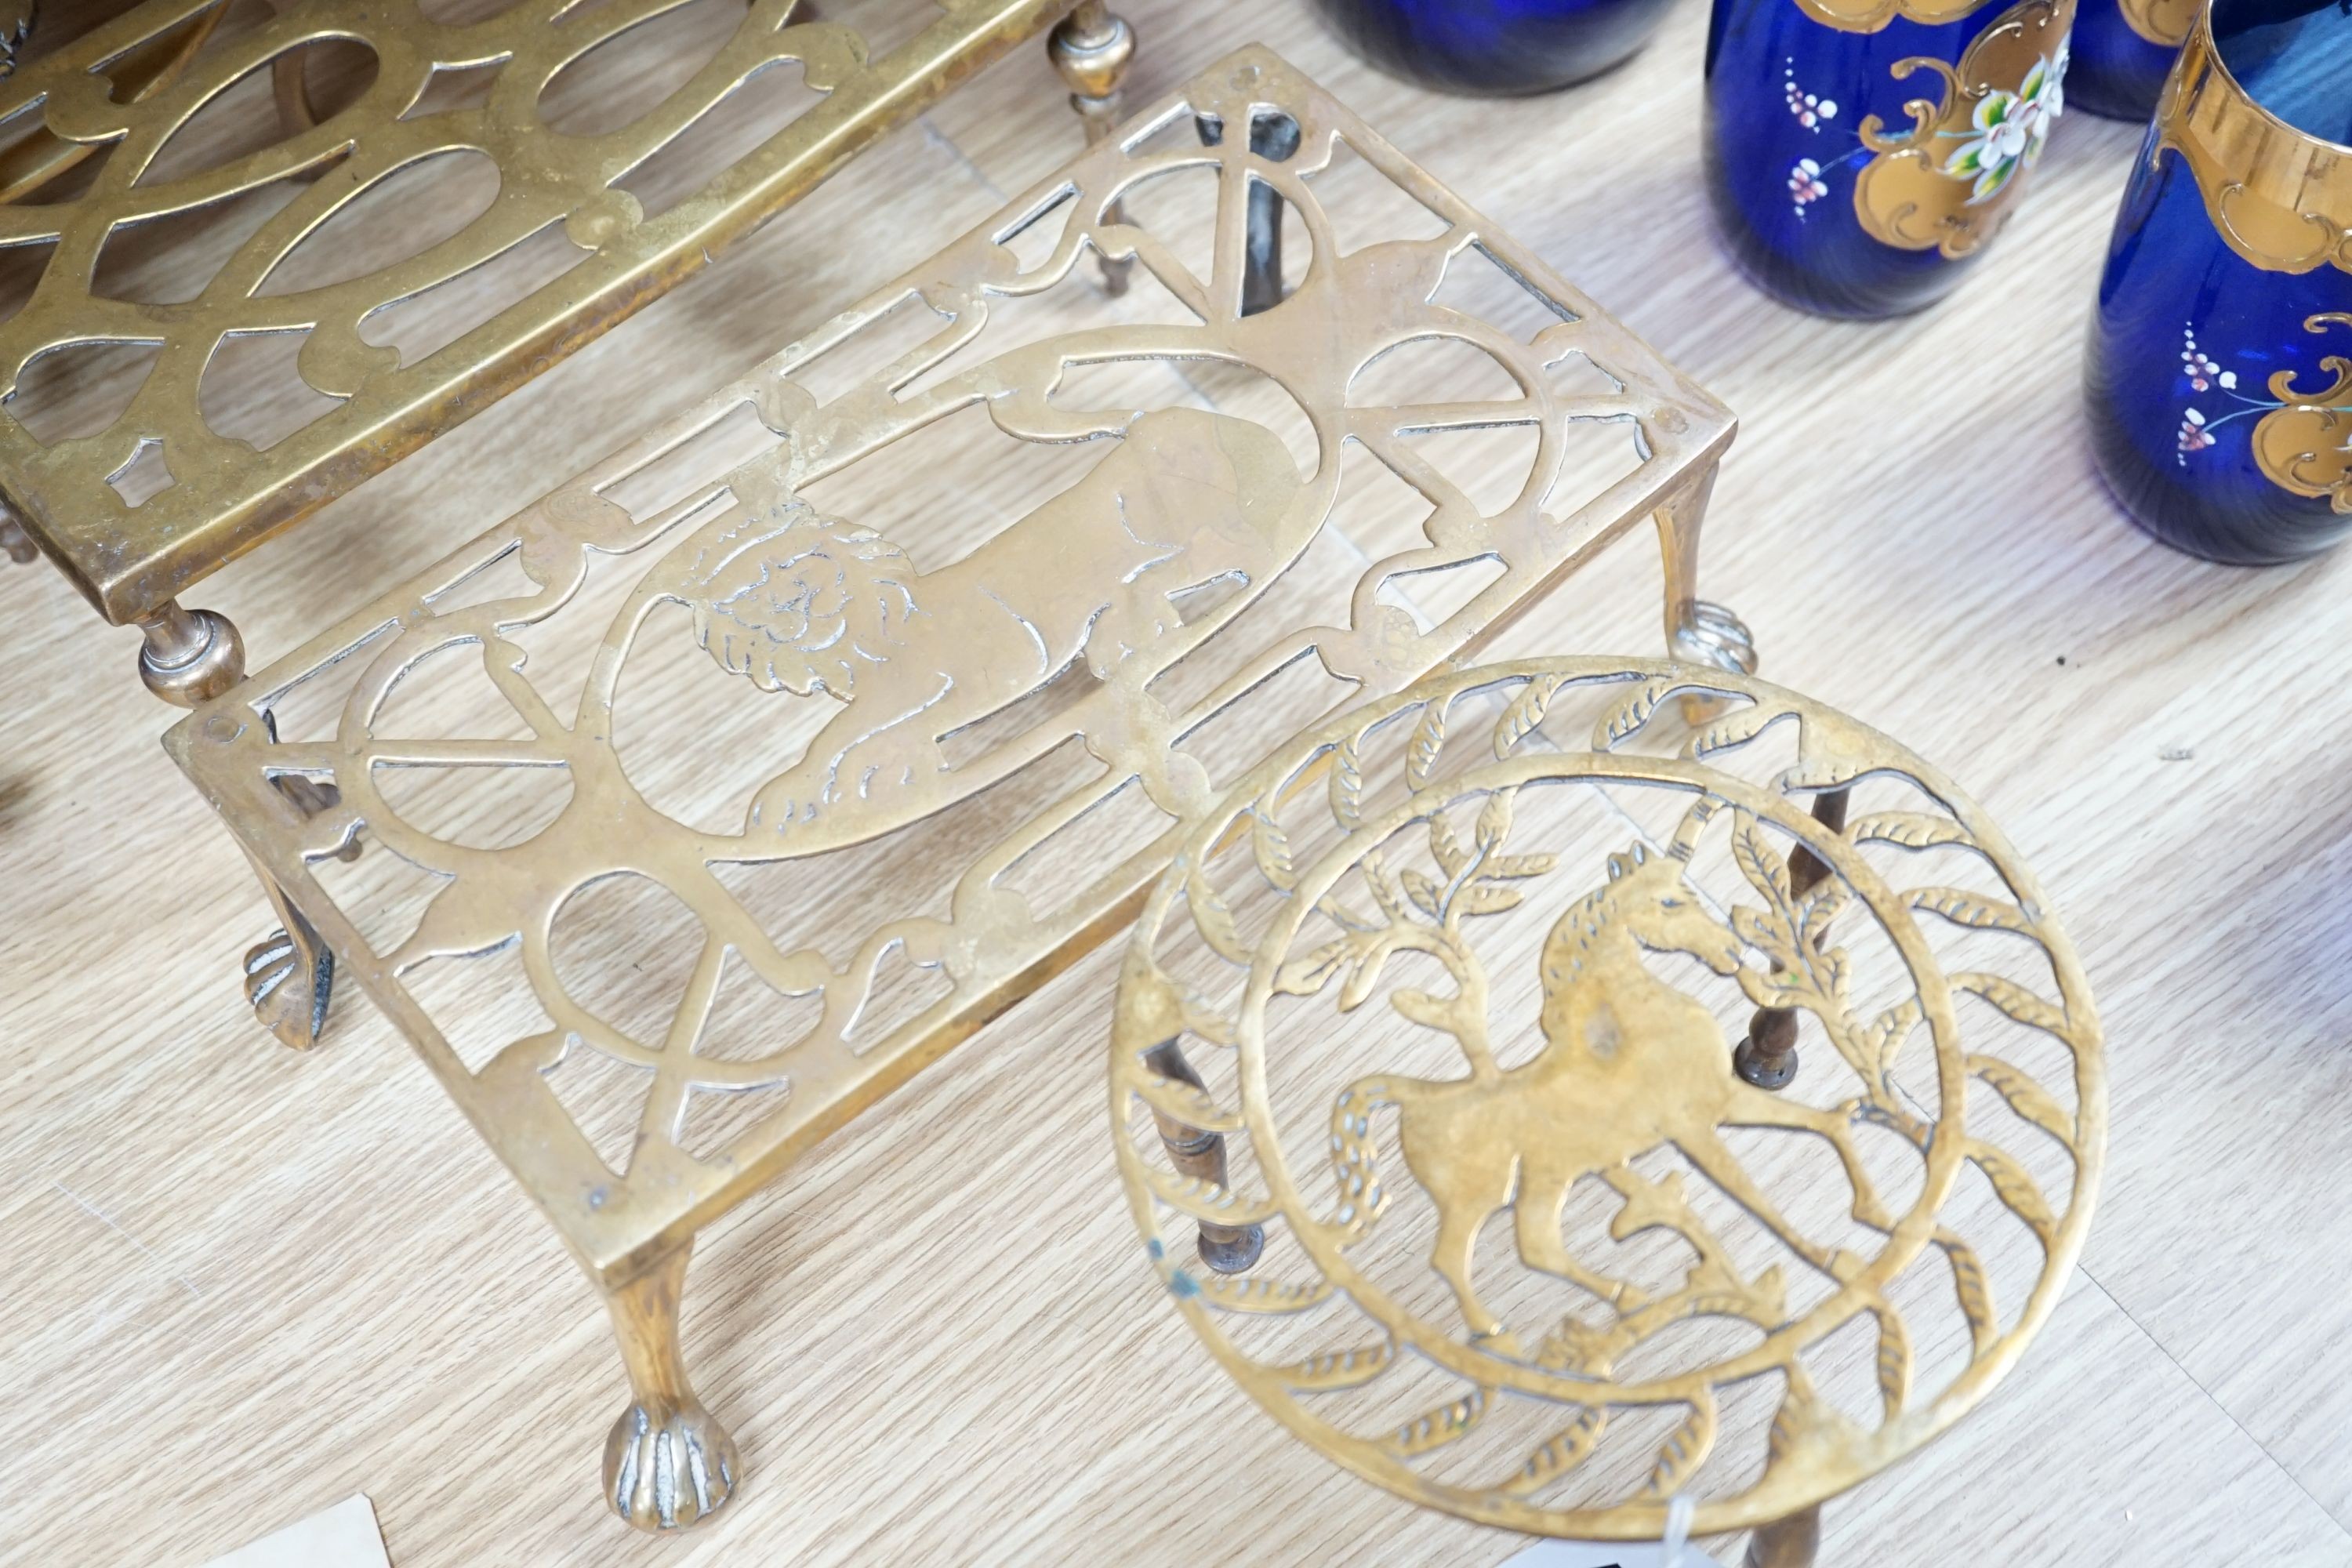 Assorted brass trivets and other brassware